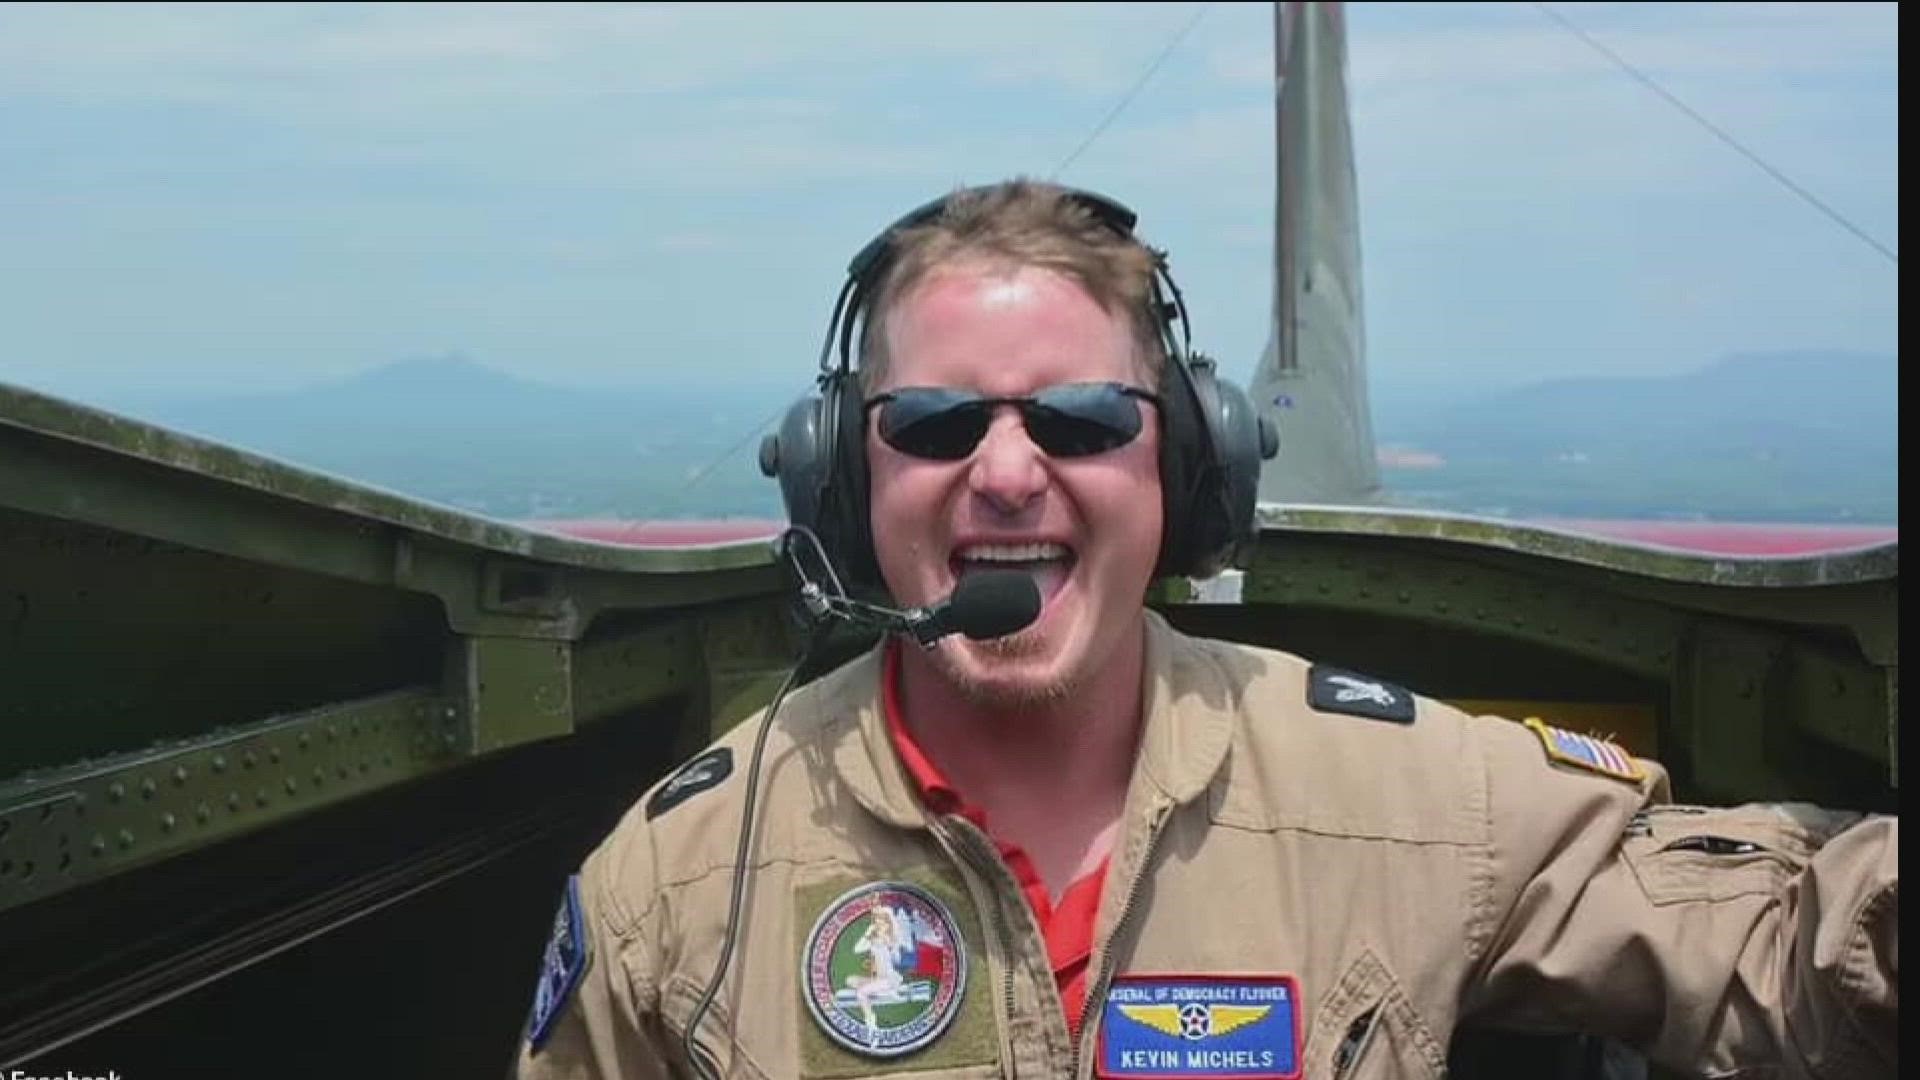 Six pilots were killed in a plane crash at a Dallas air show. One of those pilots, Kevin Michels, lived and worked in Central Texas.